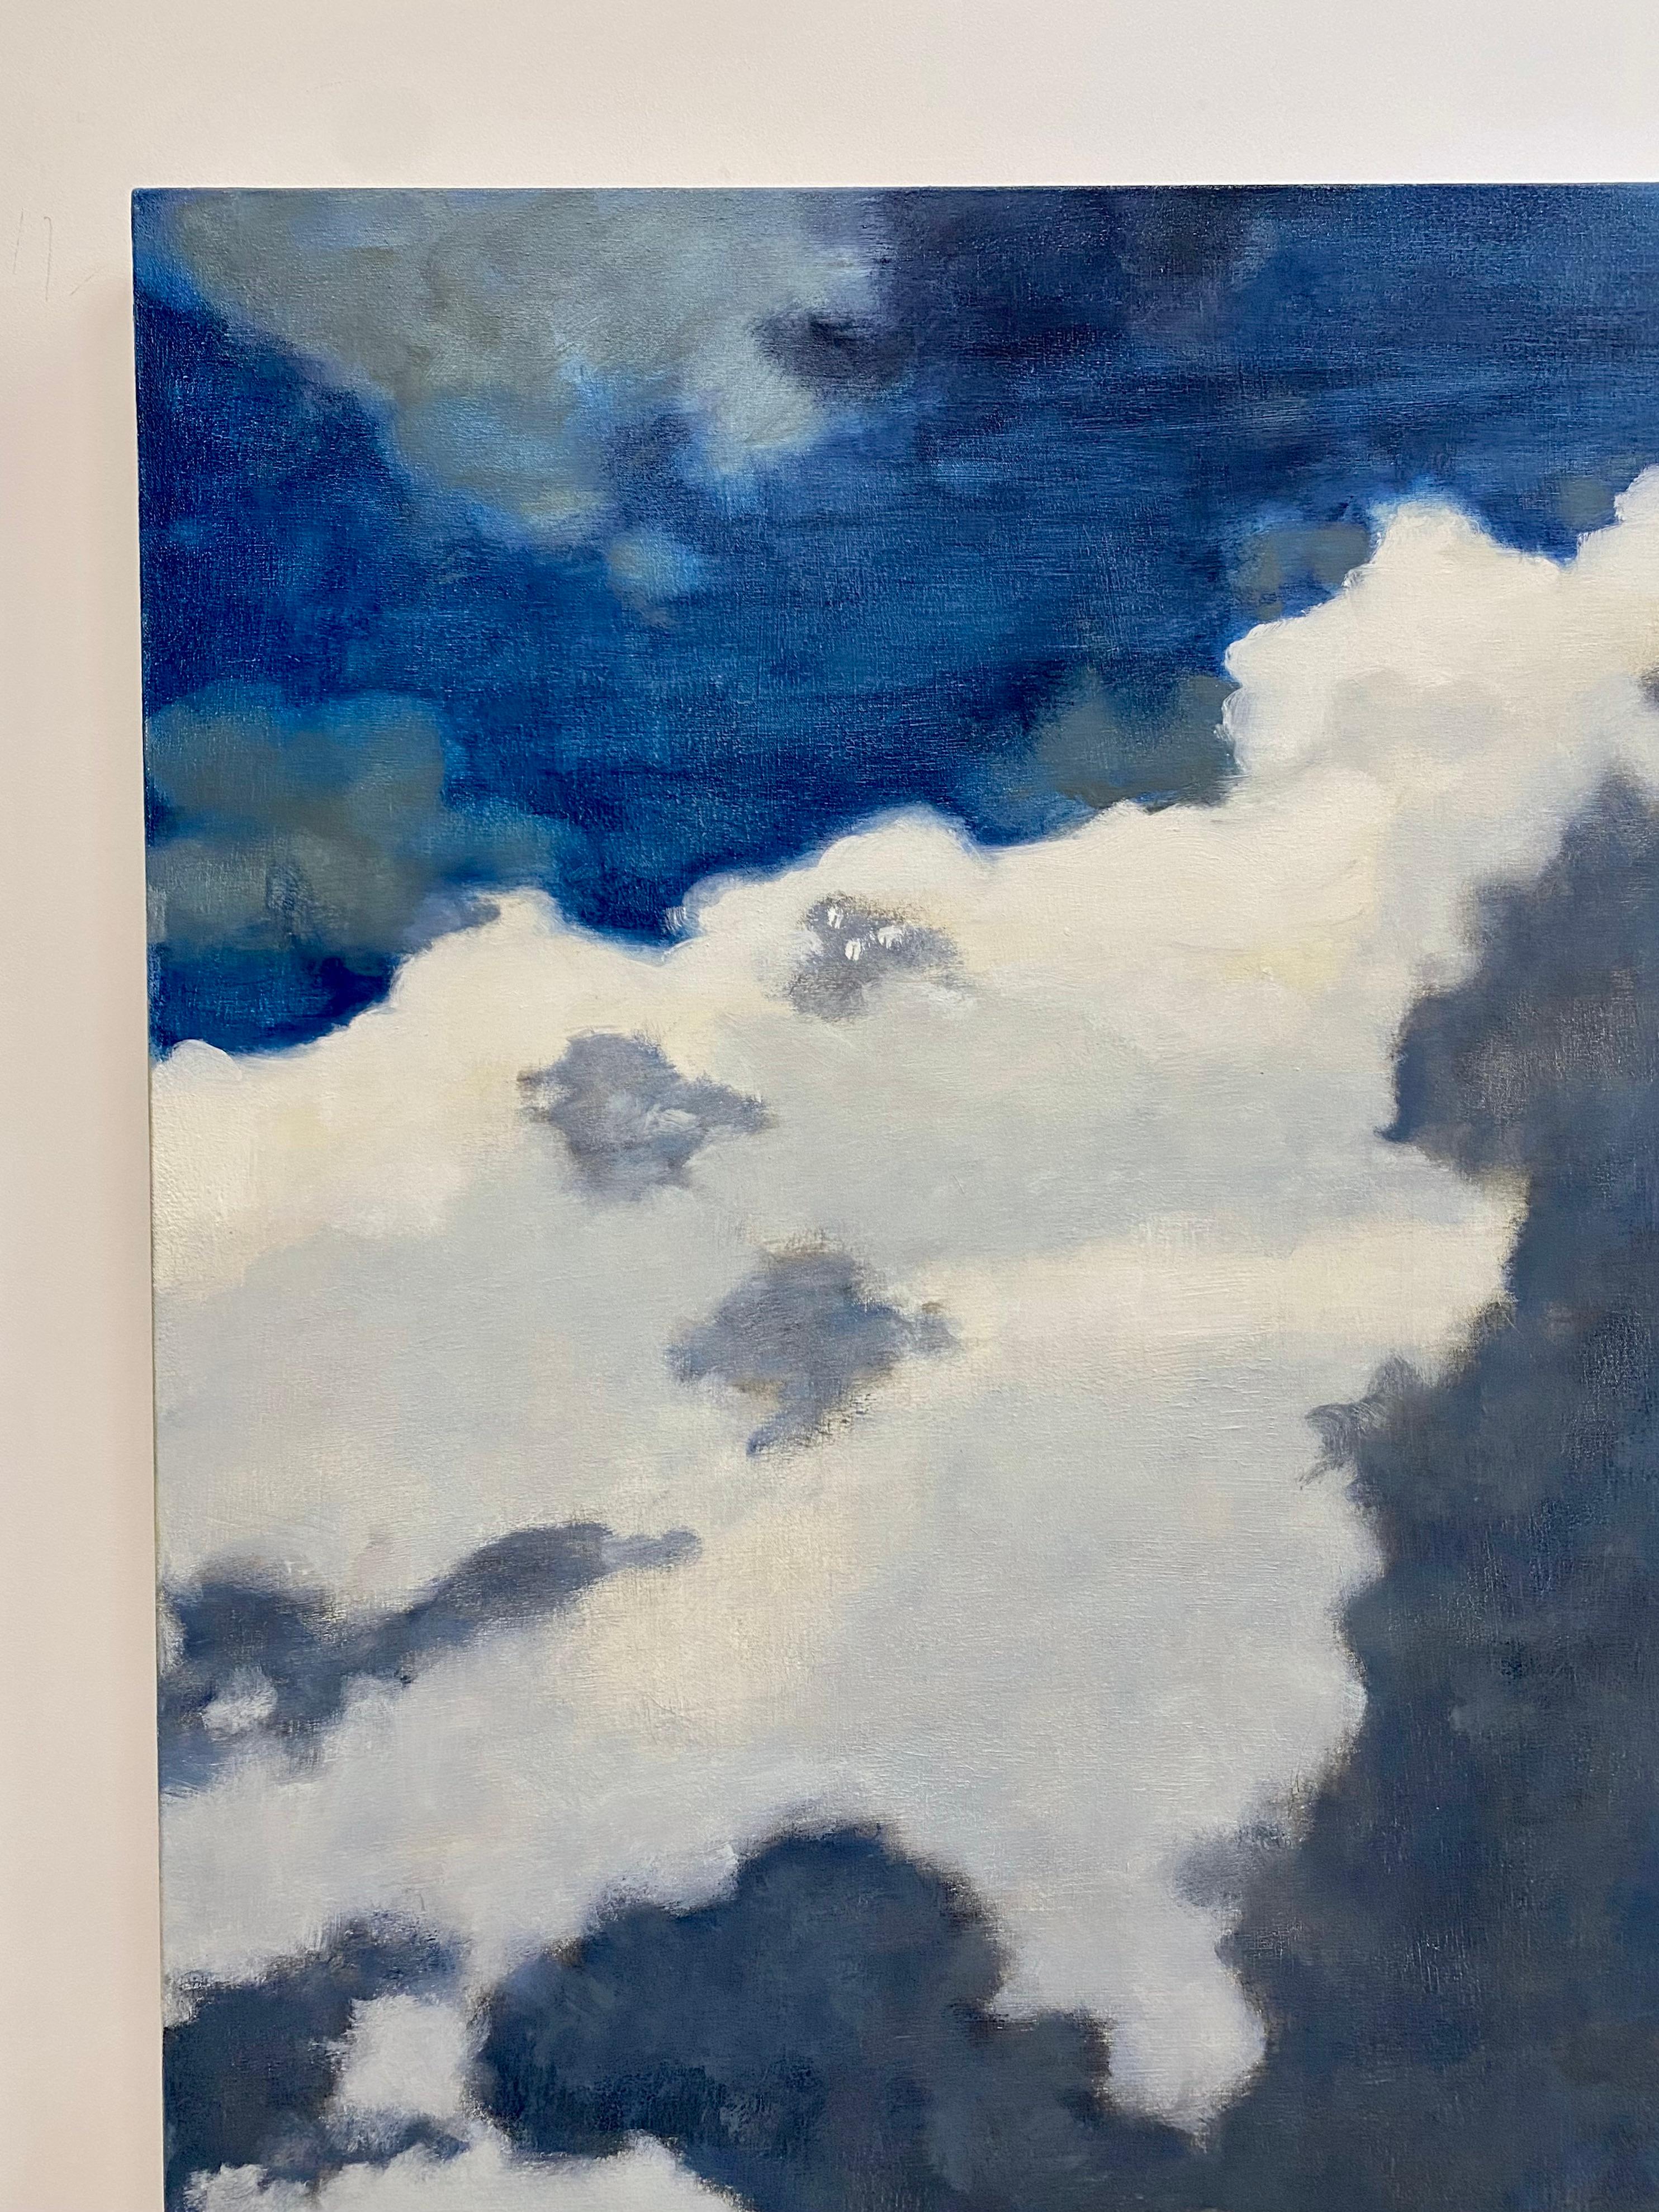 The drama and sublime beauty of the vast summer sky in New York State's Hudson Valley is captured in this dramatic skyscape painting by David Konigsberg. The artist is widely recognized for clouds and this painting is one of his best - it is a